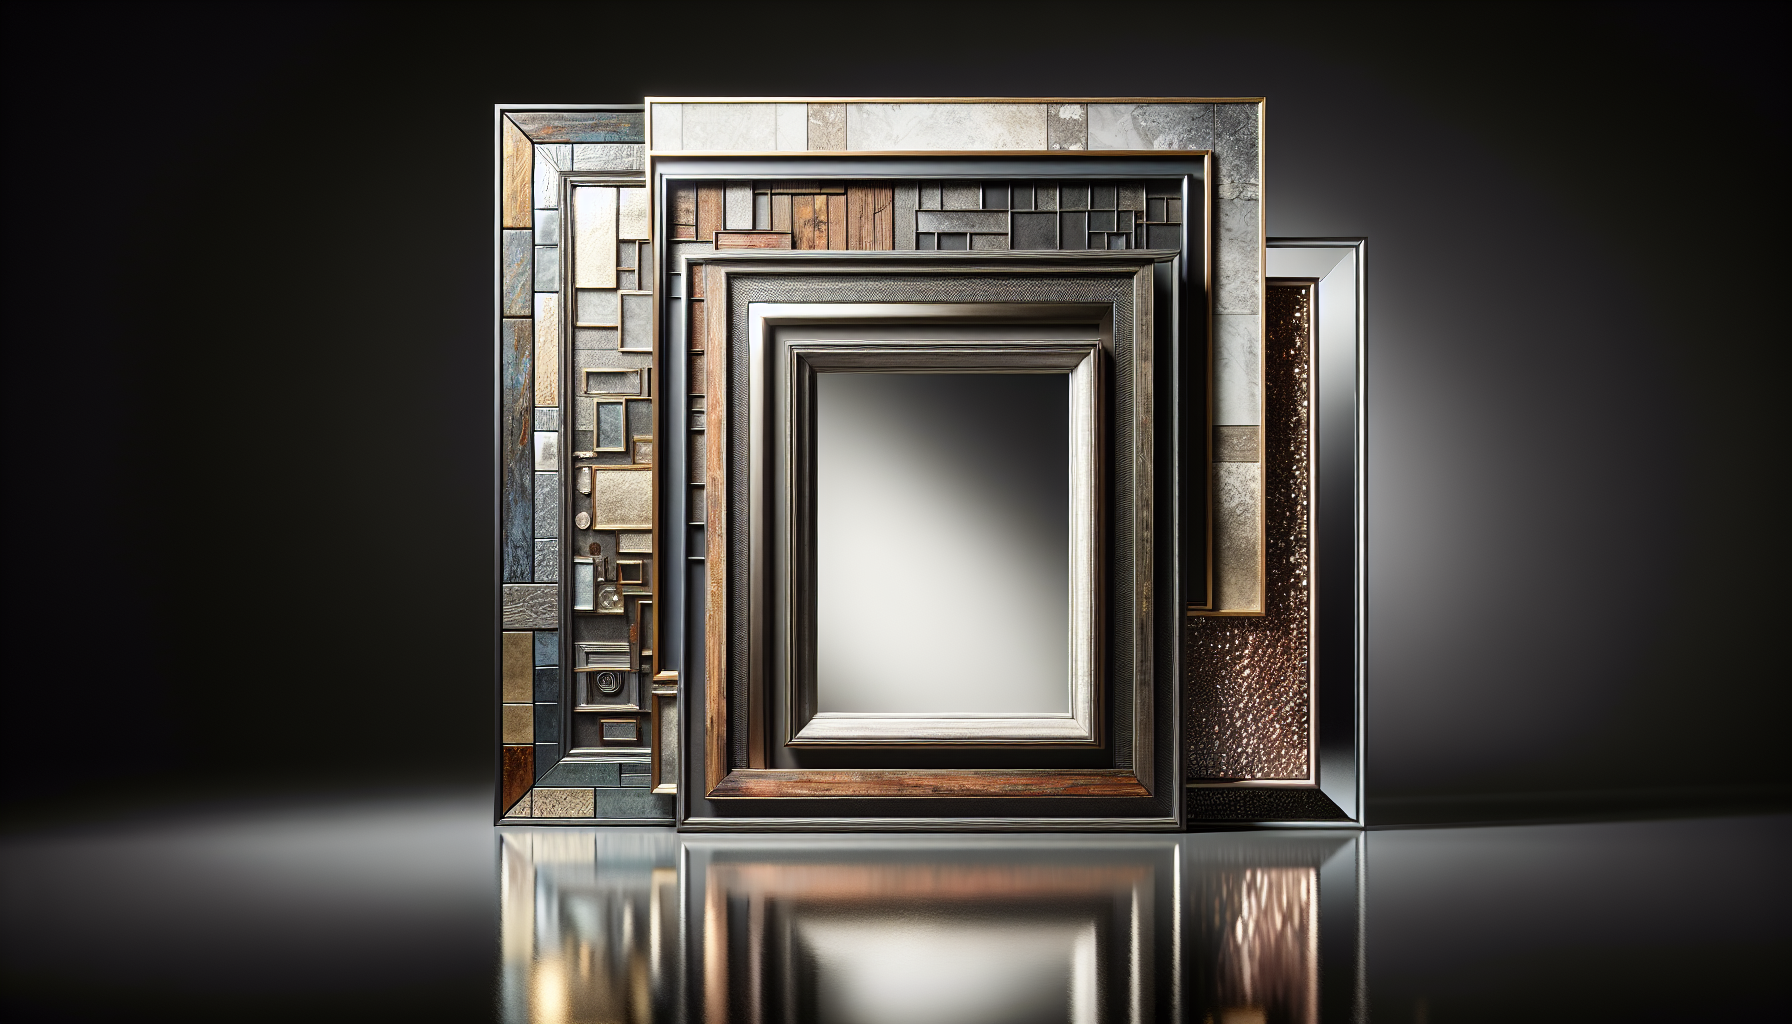 Diverse material choices for framed mirrors